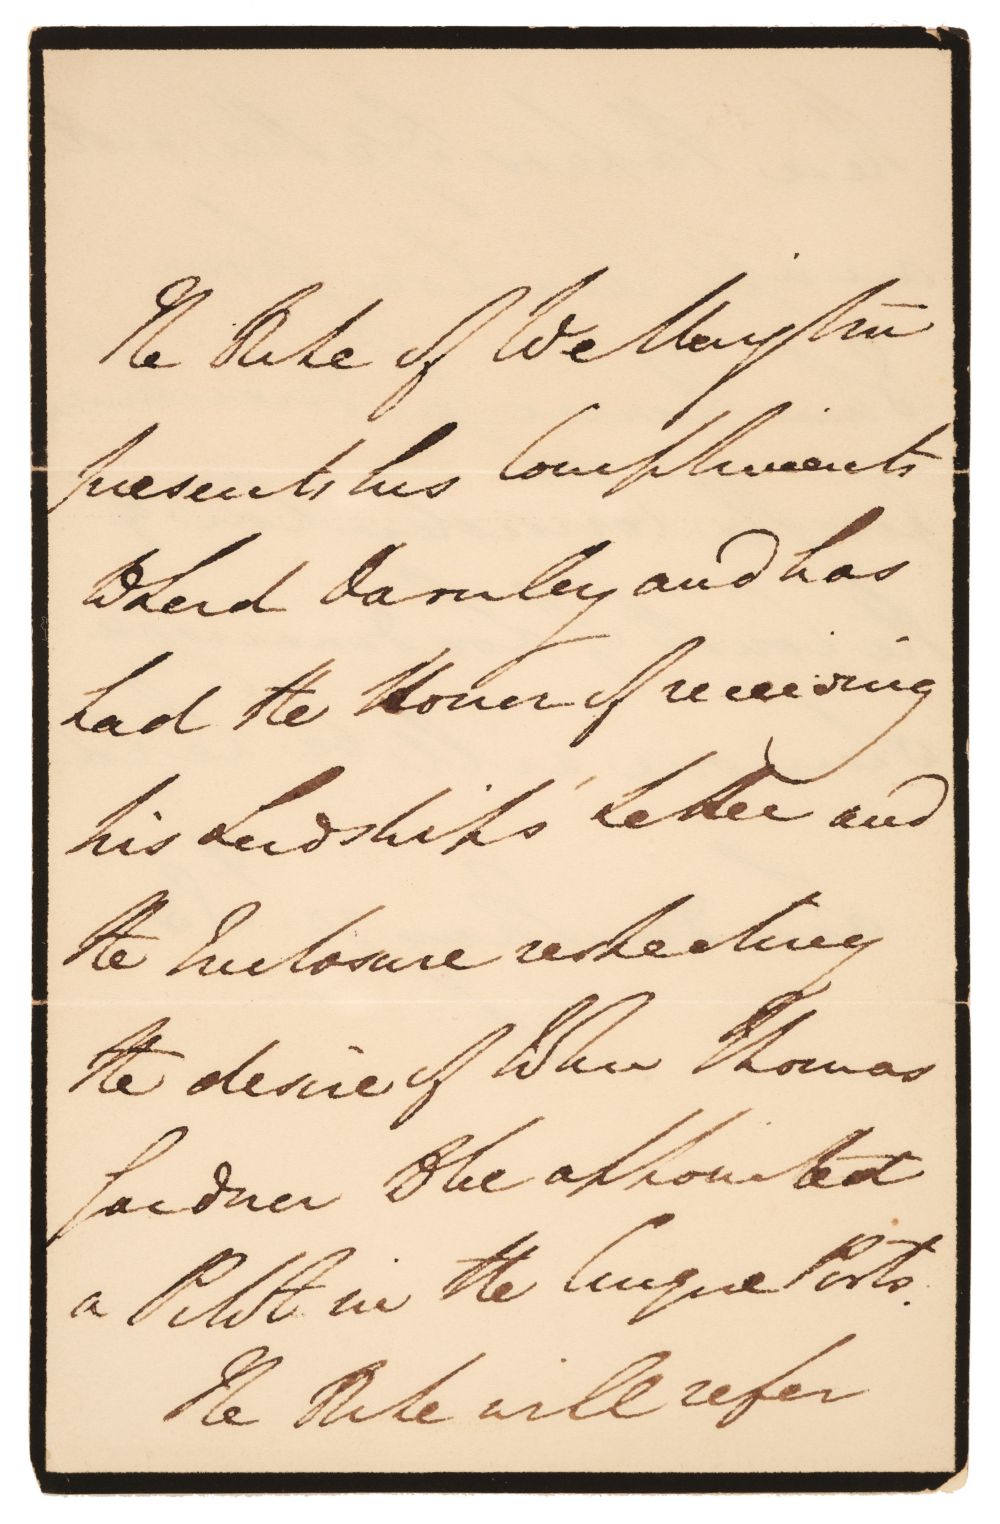 Wellesley (Arthur, 1769-1852). Autograph Letter Signed in the third person, 30 May 1831